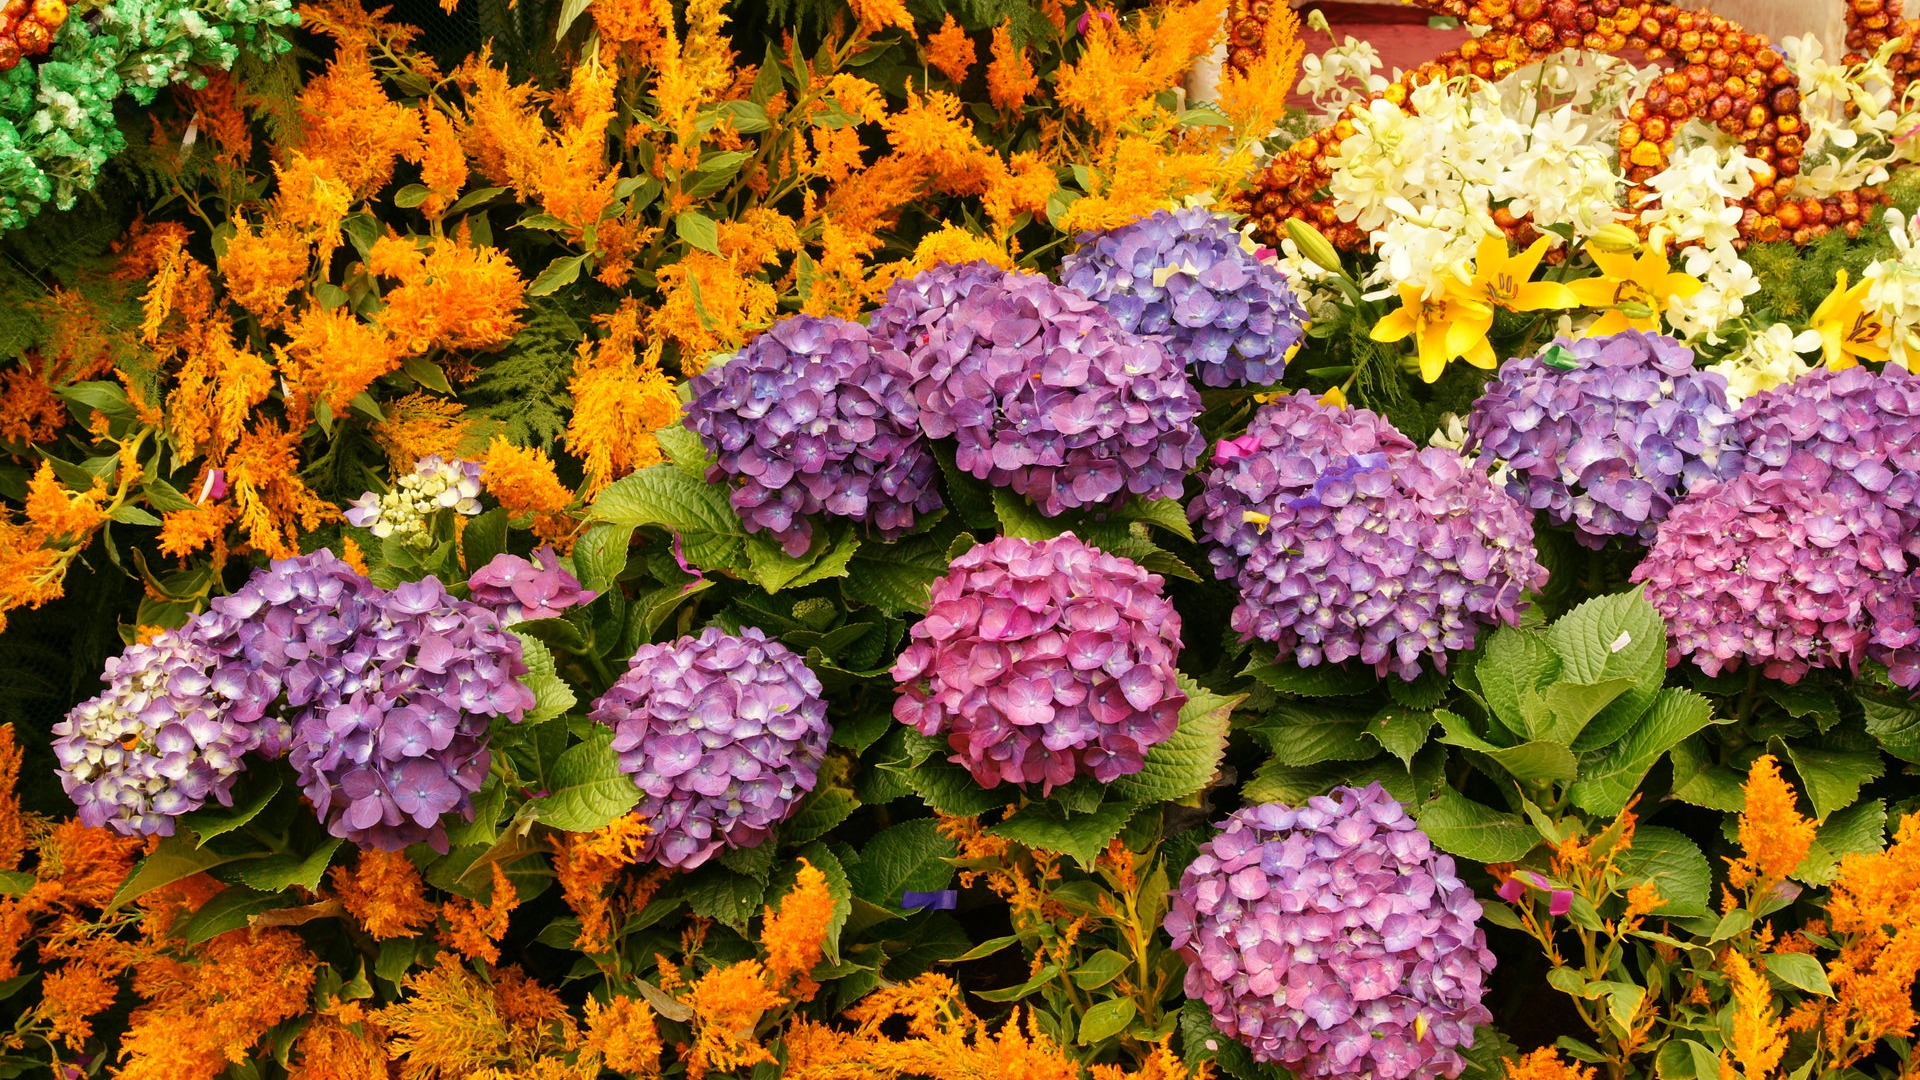 Colorful flowers decorate wallpaper (4) #13 - 1920x1080